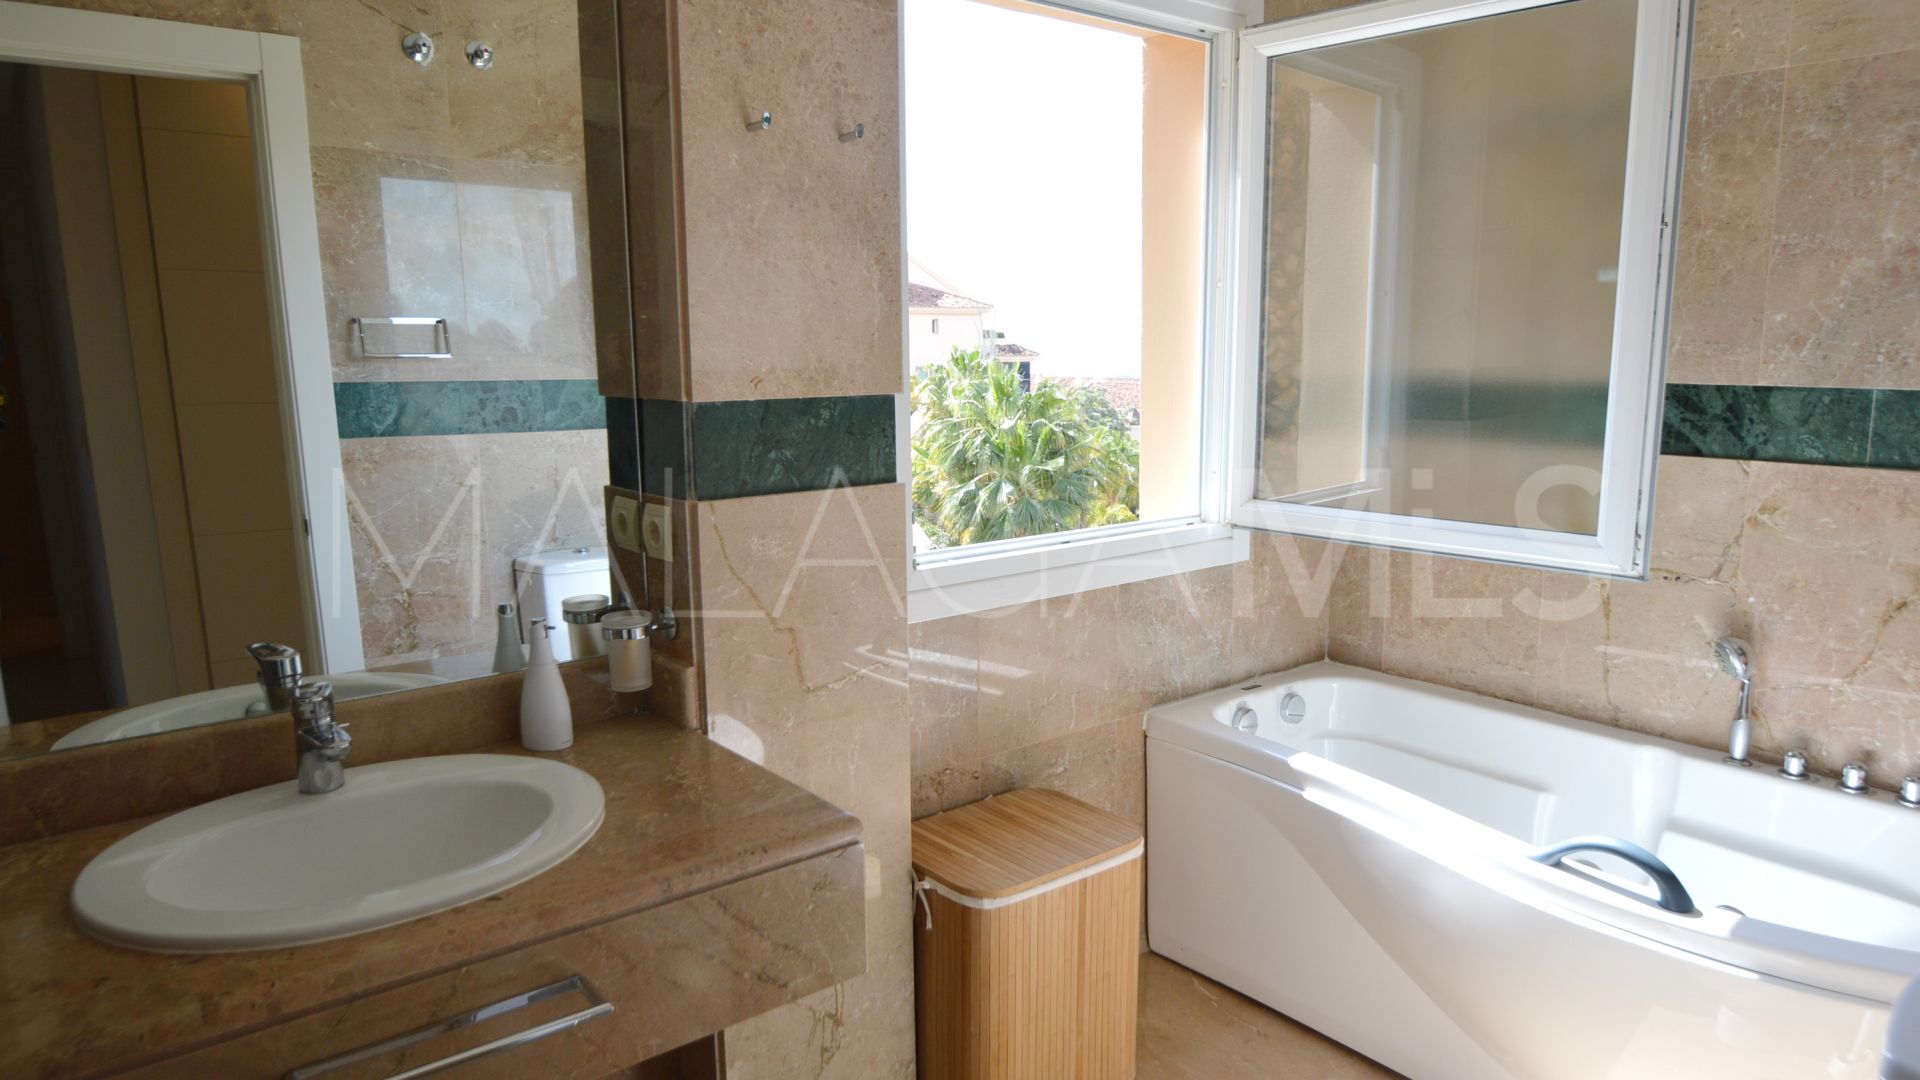 3 bedrooms apartment in Vista Real for sale